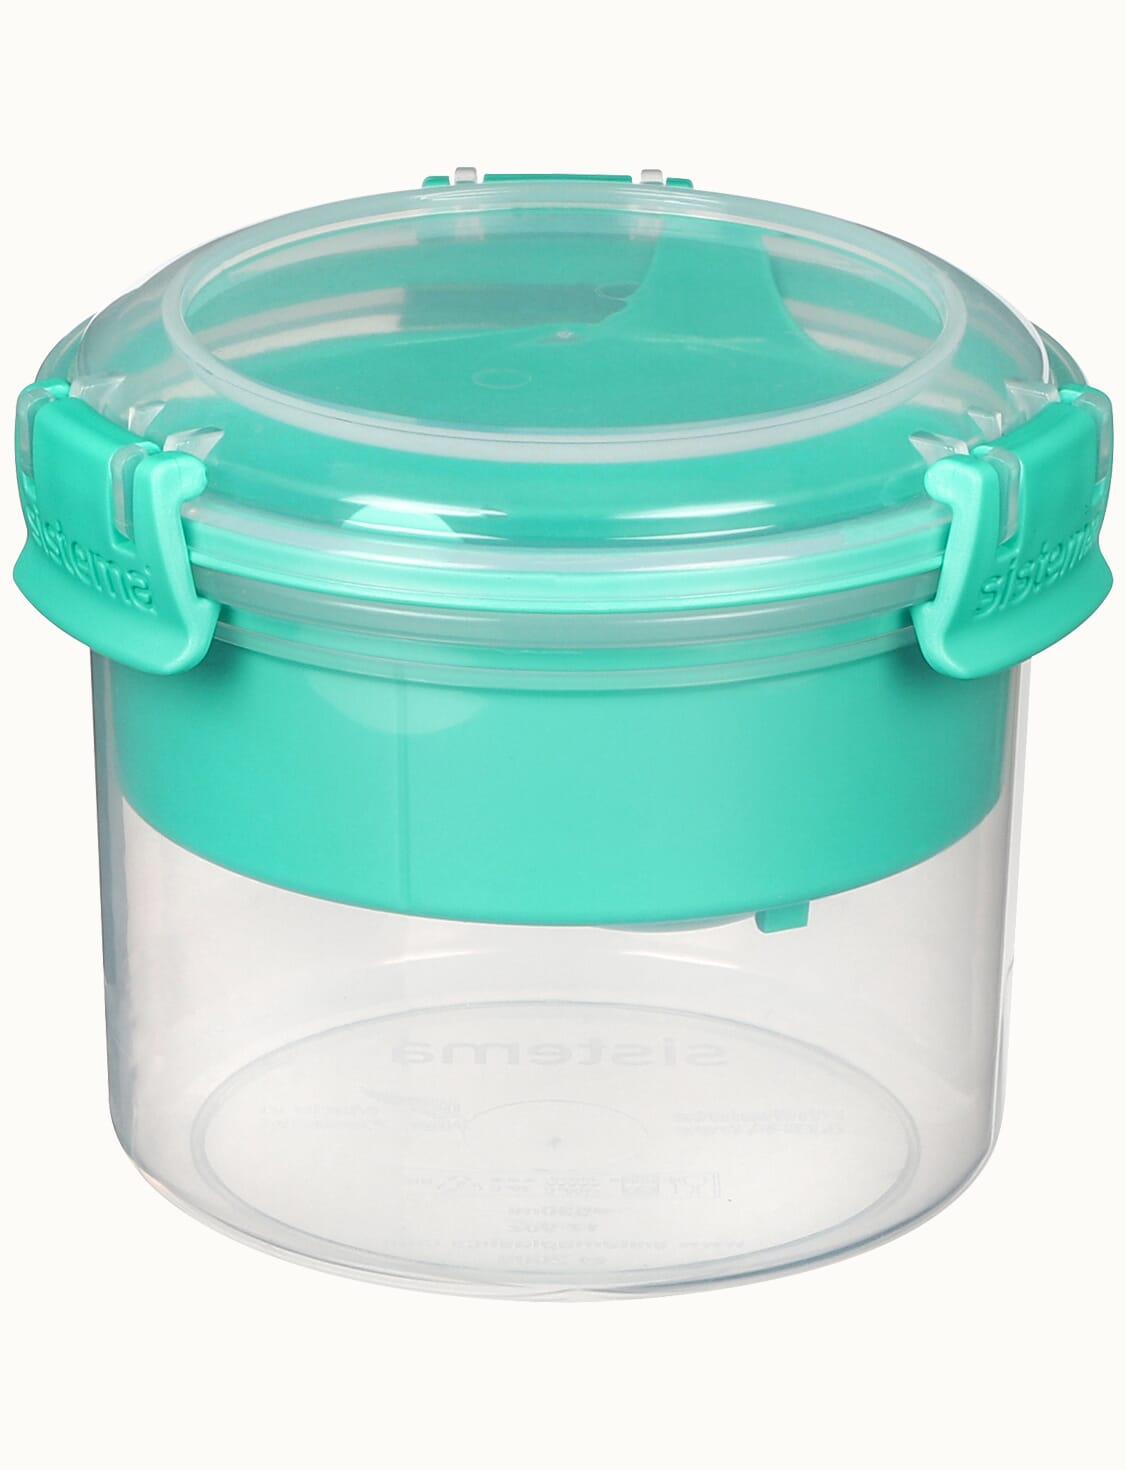 Sistema To Go 530mL Breakfast Container - Clear/Randomly Selected